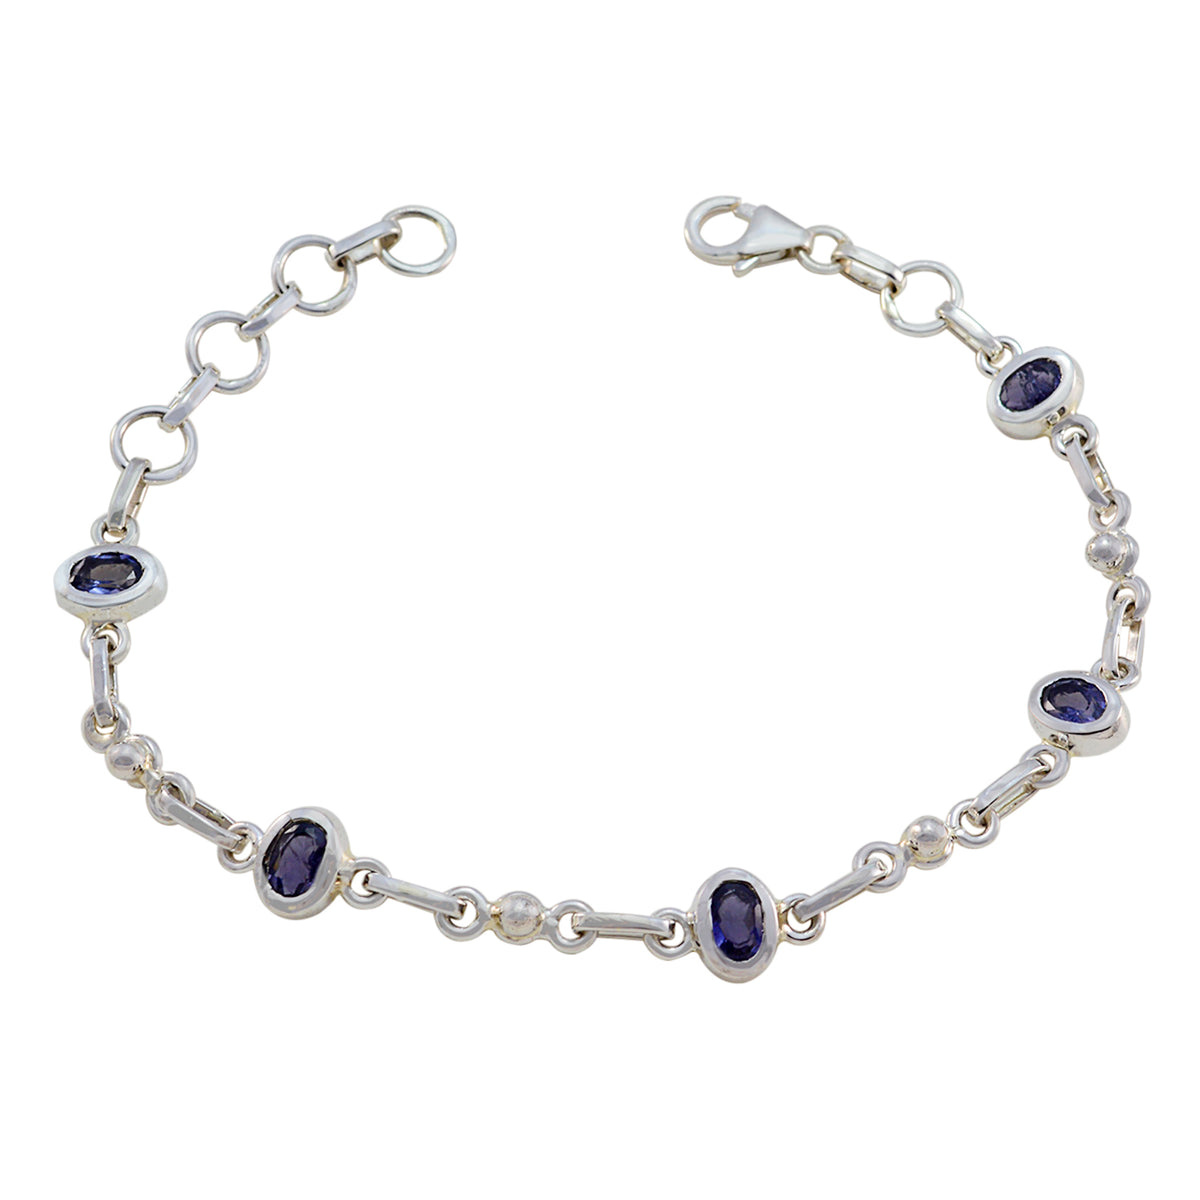 Riyo Real Gemstones Oval Faceted Navy Blue Iolite Silver Bracelets gift for christmas day